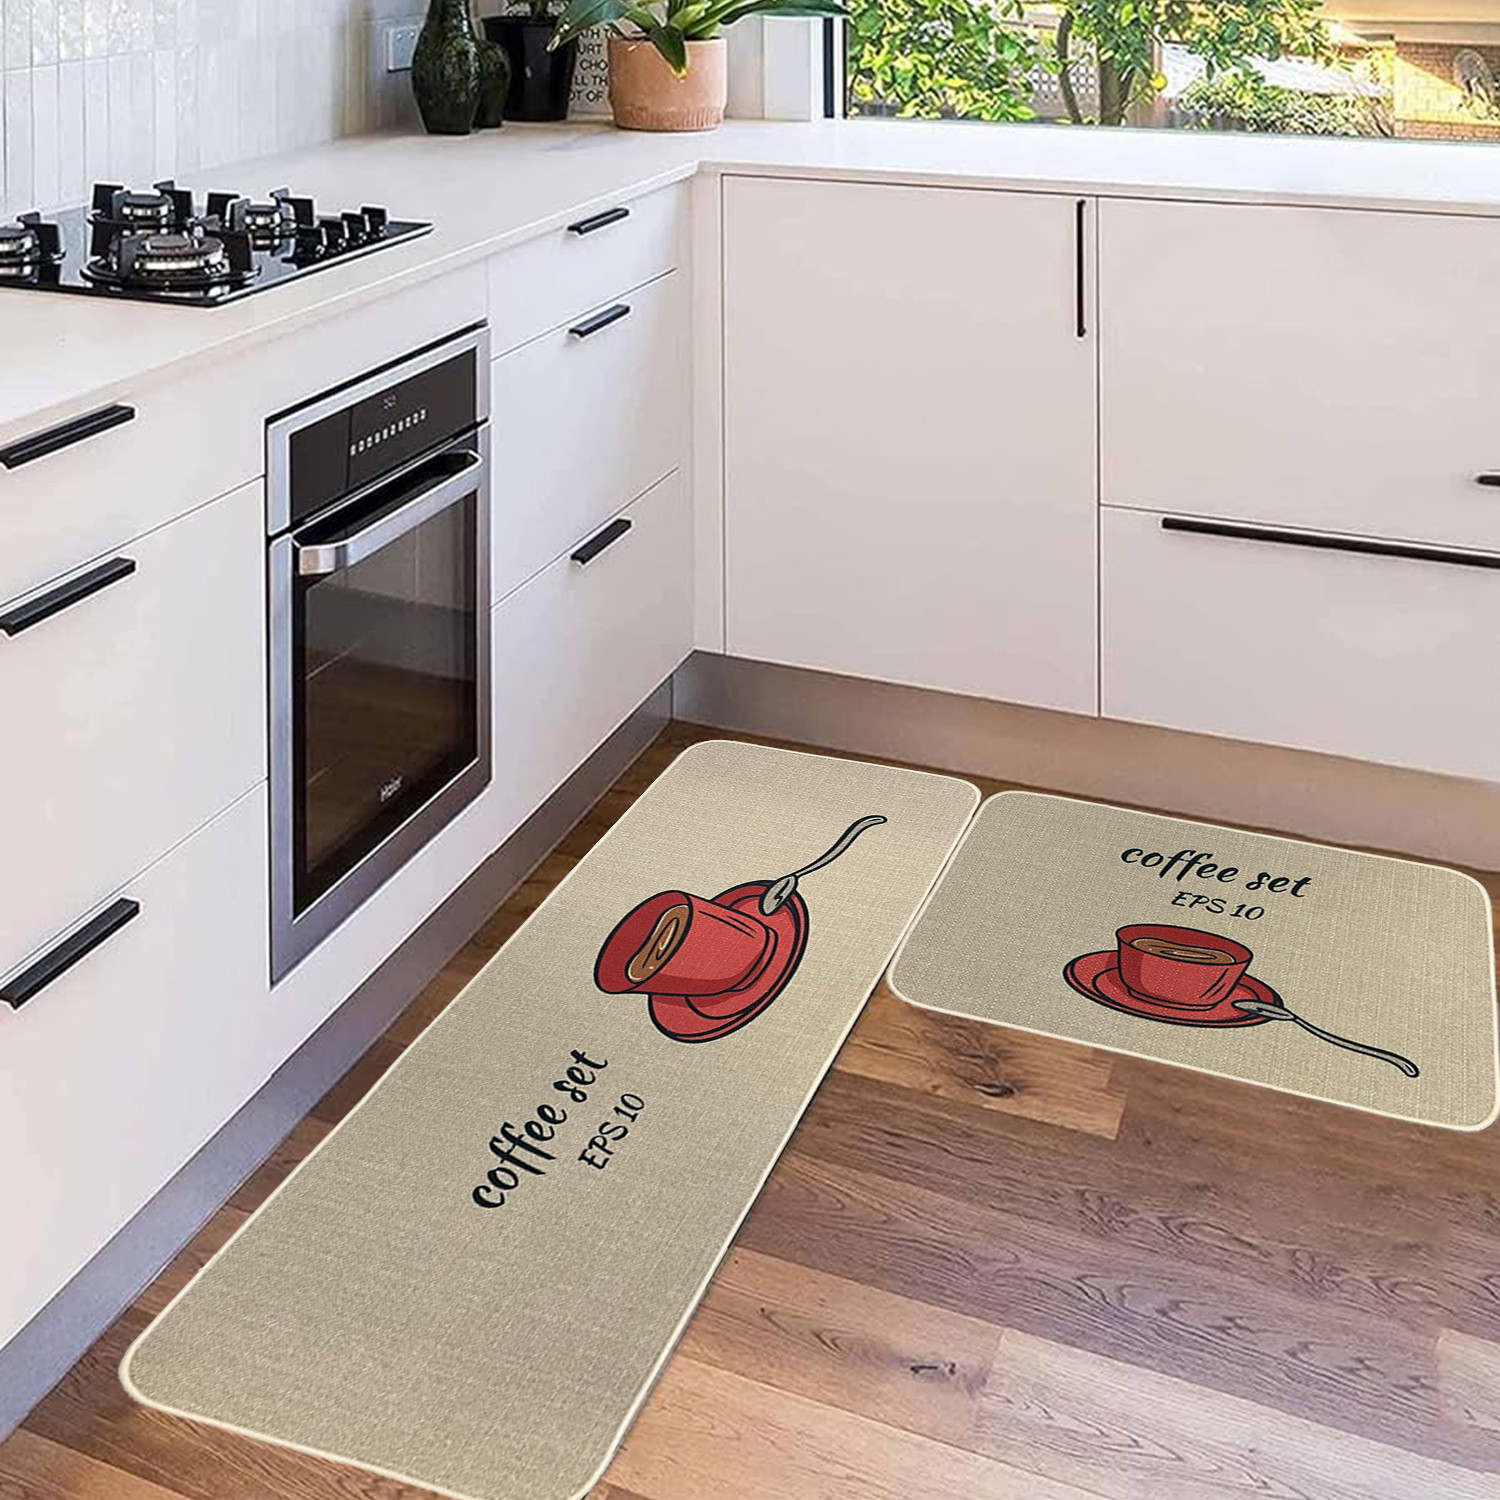 Kitchen Rugs Set, 2 Pieces Kitchenware Style Non Slip Kitchen Mat, Easy to Clean Comfort Standing Mats for Kitchen, Home, Office, Laundry